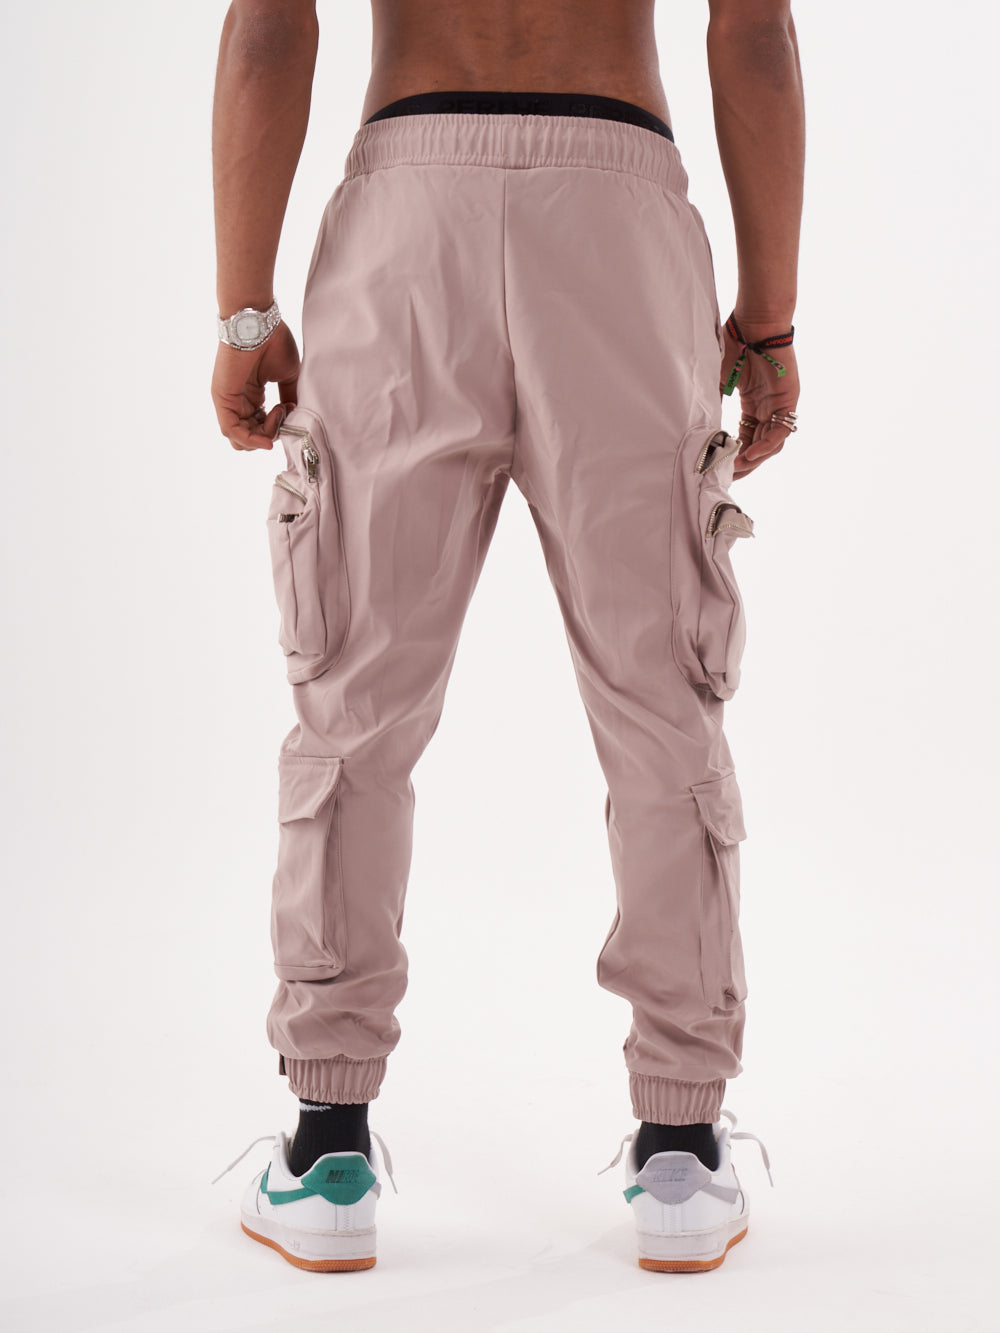 The back view of a man wearing Spunk Joggers | Mauve.